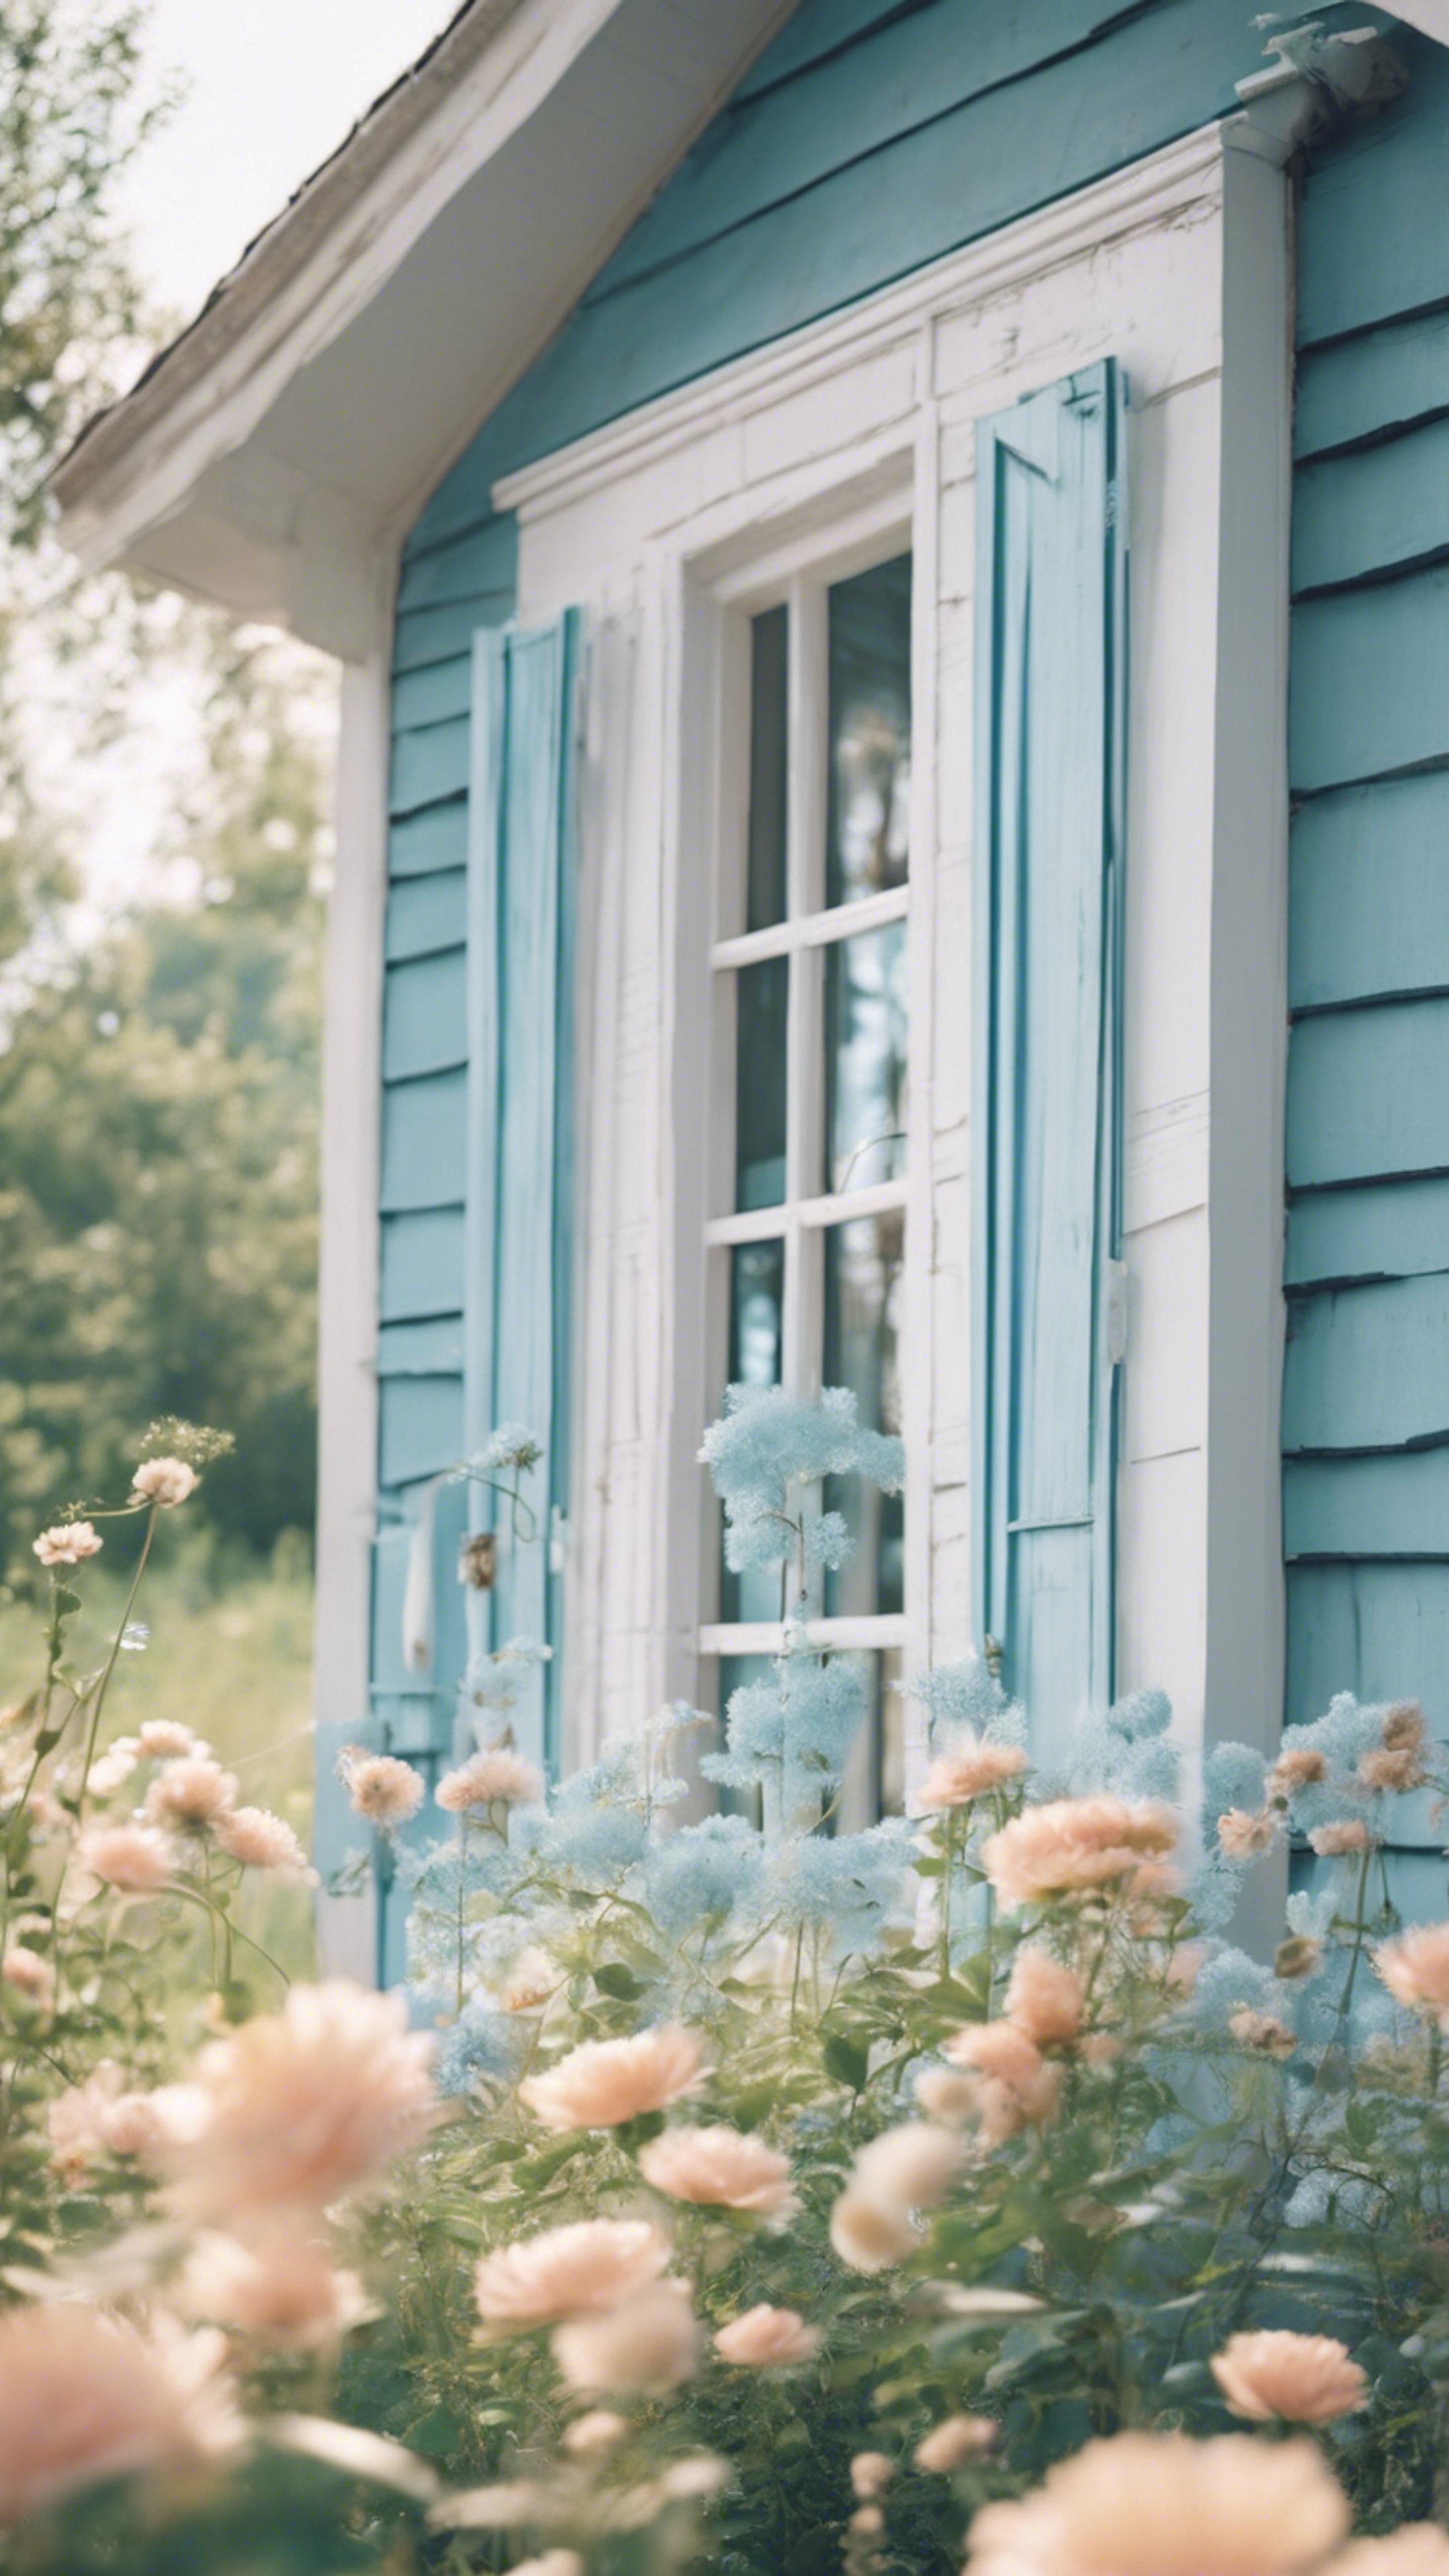 Preppy pastel blue summer farmhouse with white wooden windows. Тапет[48dc49ad1a9b4a7c9166]